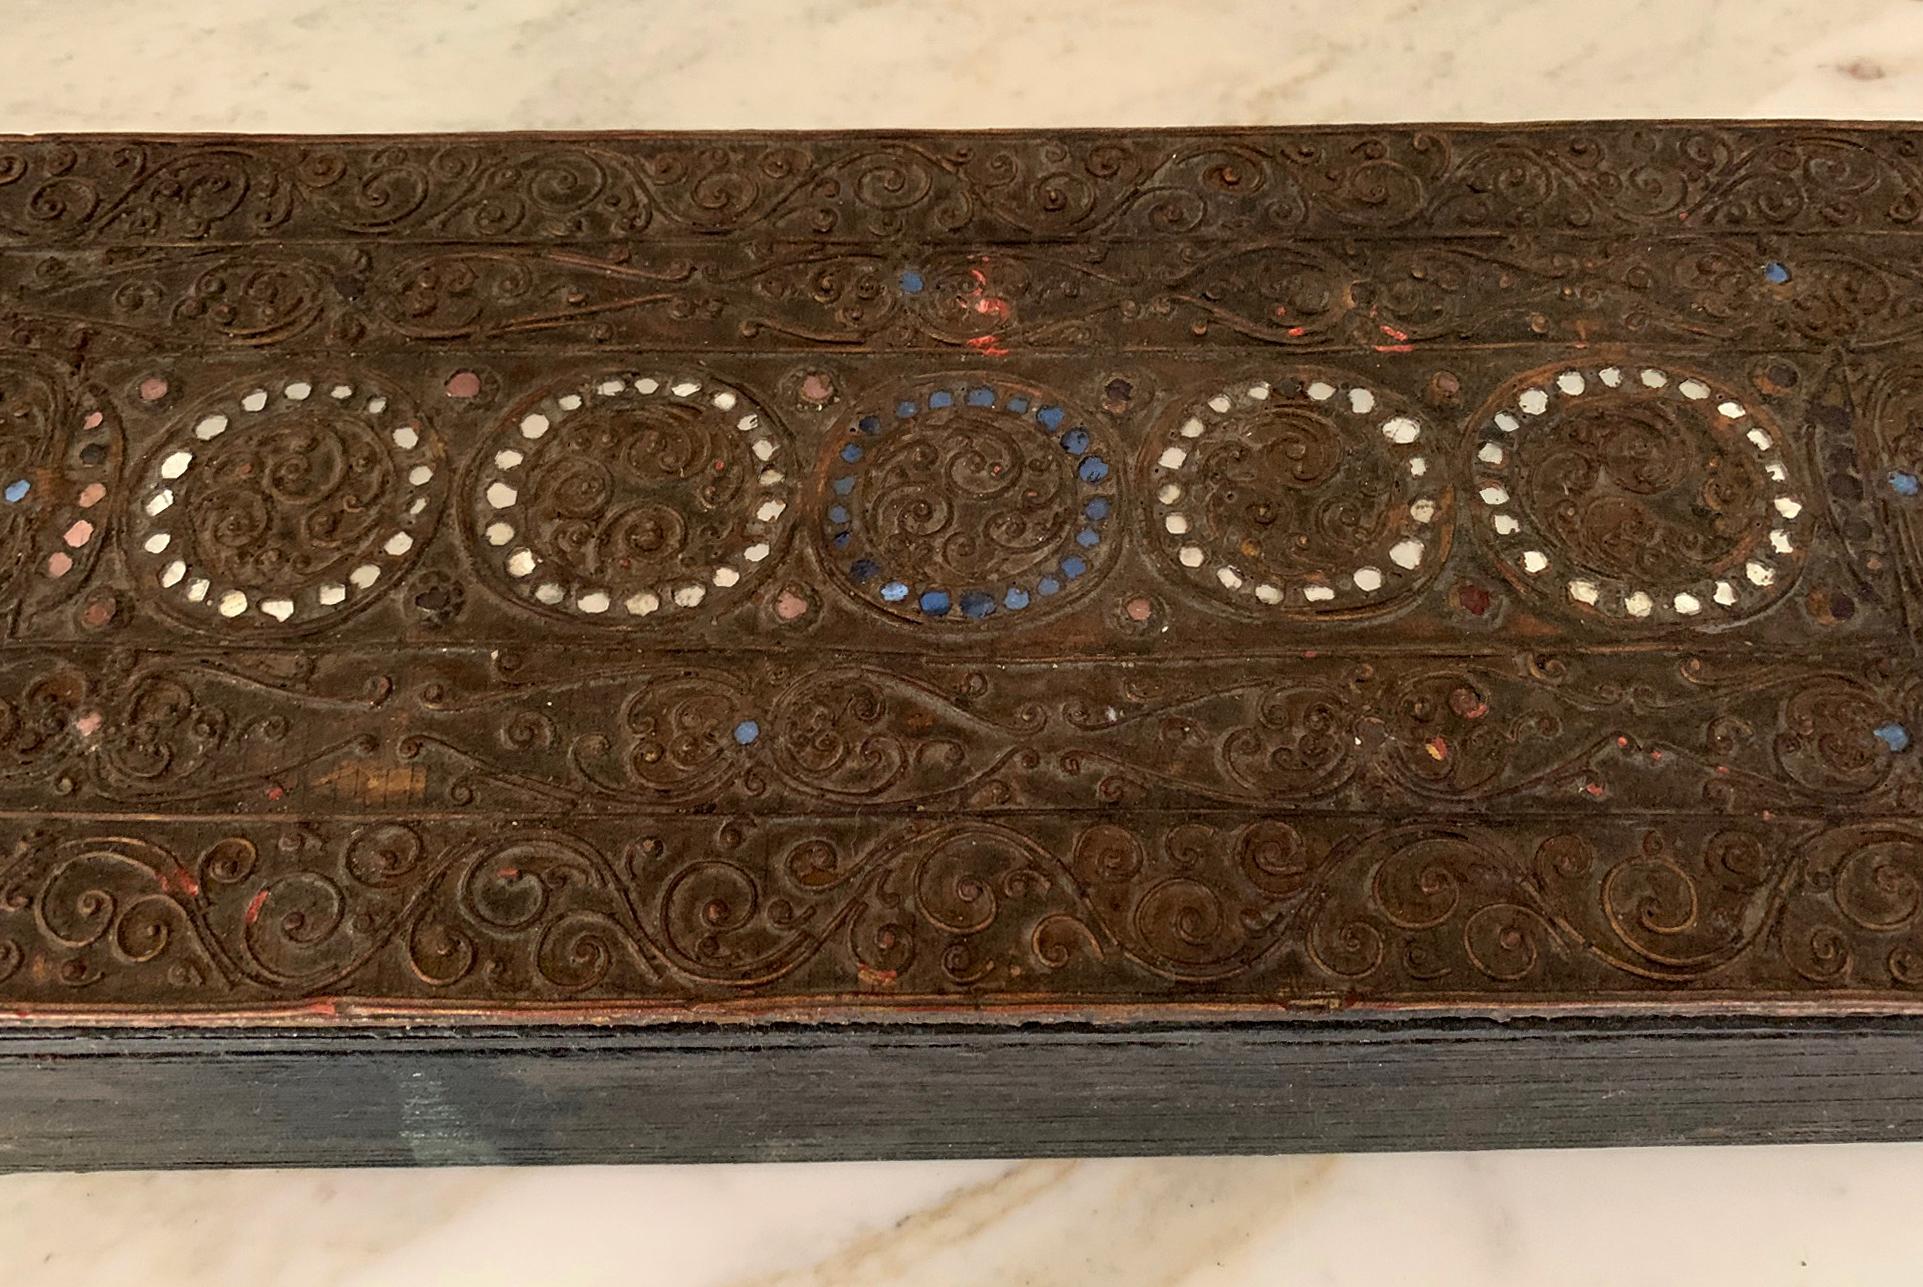 A large Theravada Buddhism scripture book from Burma, circa late 19th century-early 20th century. The book opens to continuous folding pages that is accordion like. Ink scriptures in curvy Burmese language were handwritten on both sides of the